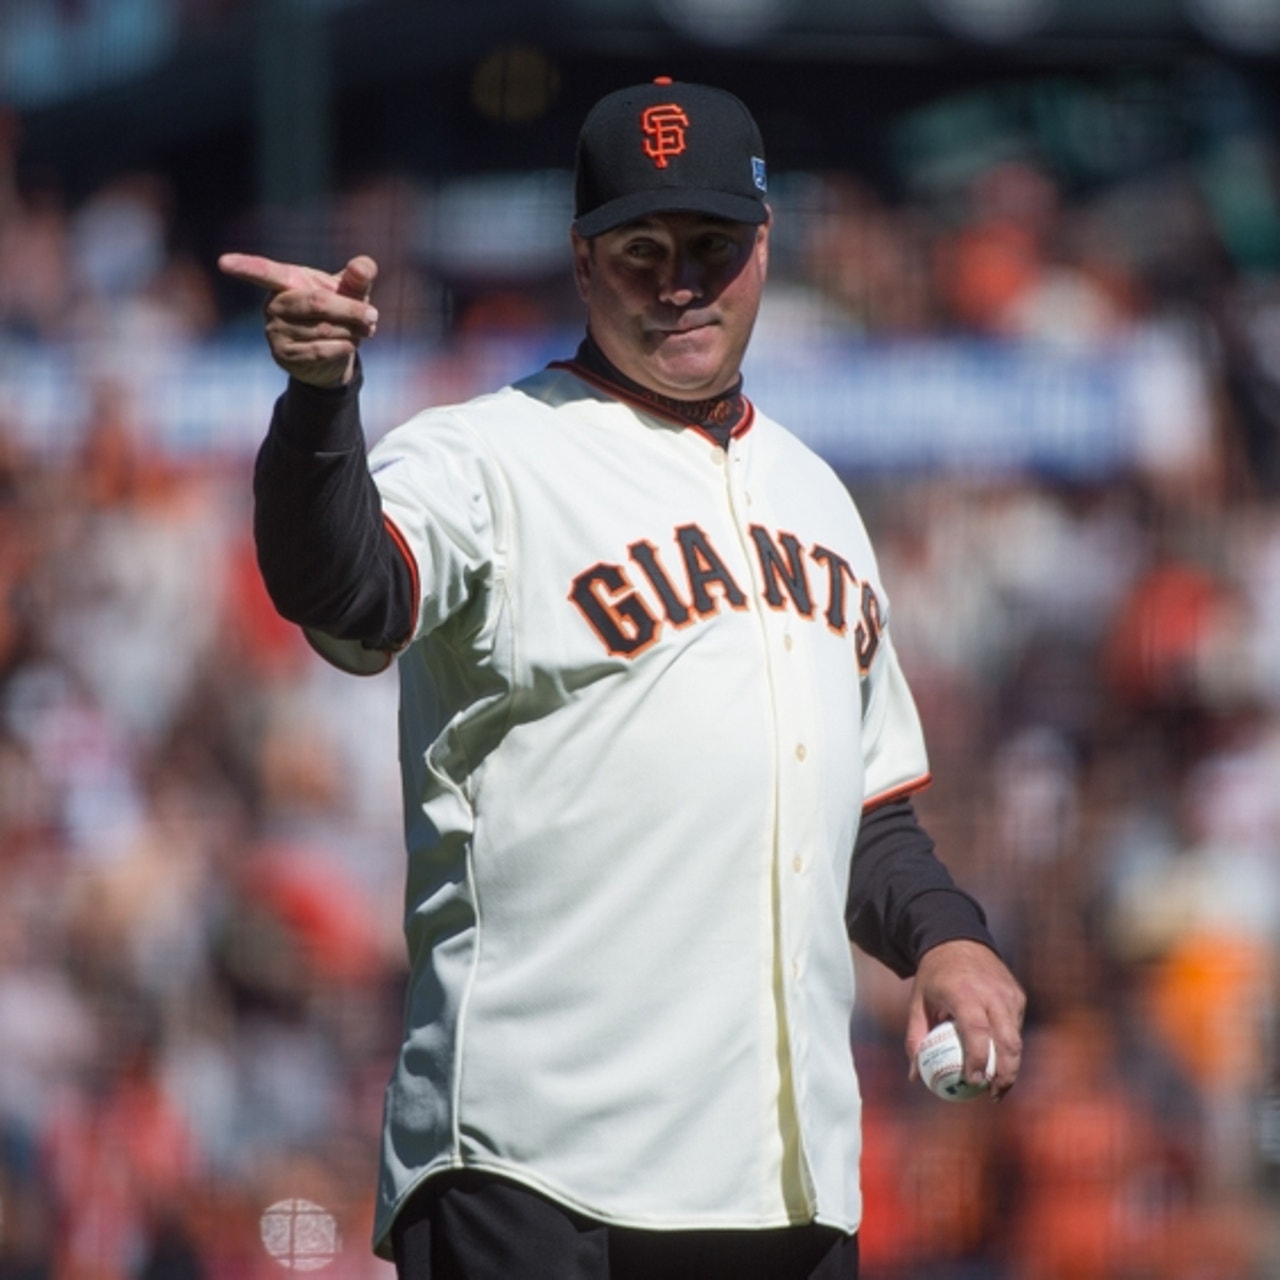 San Francisco Giants: Will Clark Has Second Chance at Hall of Fame